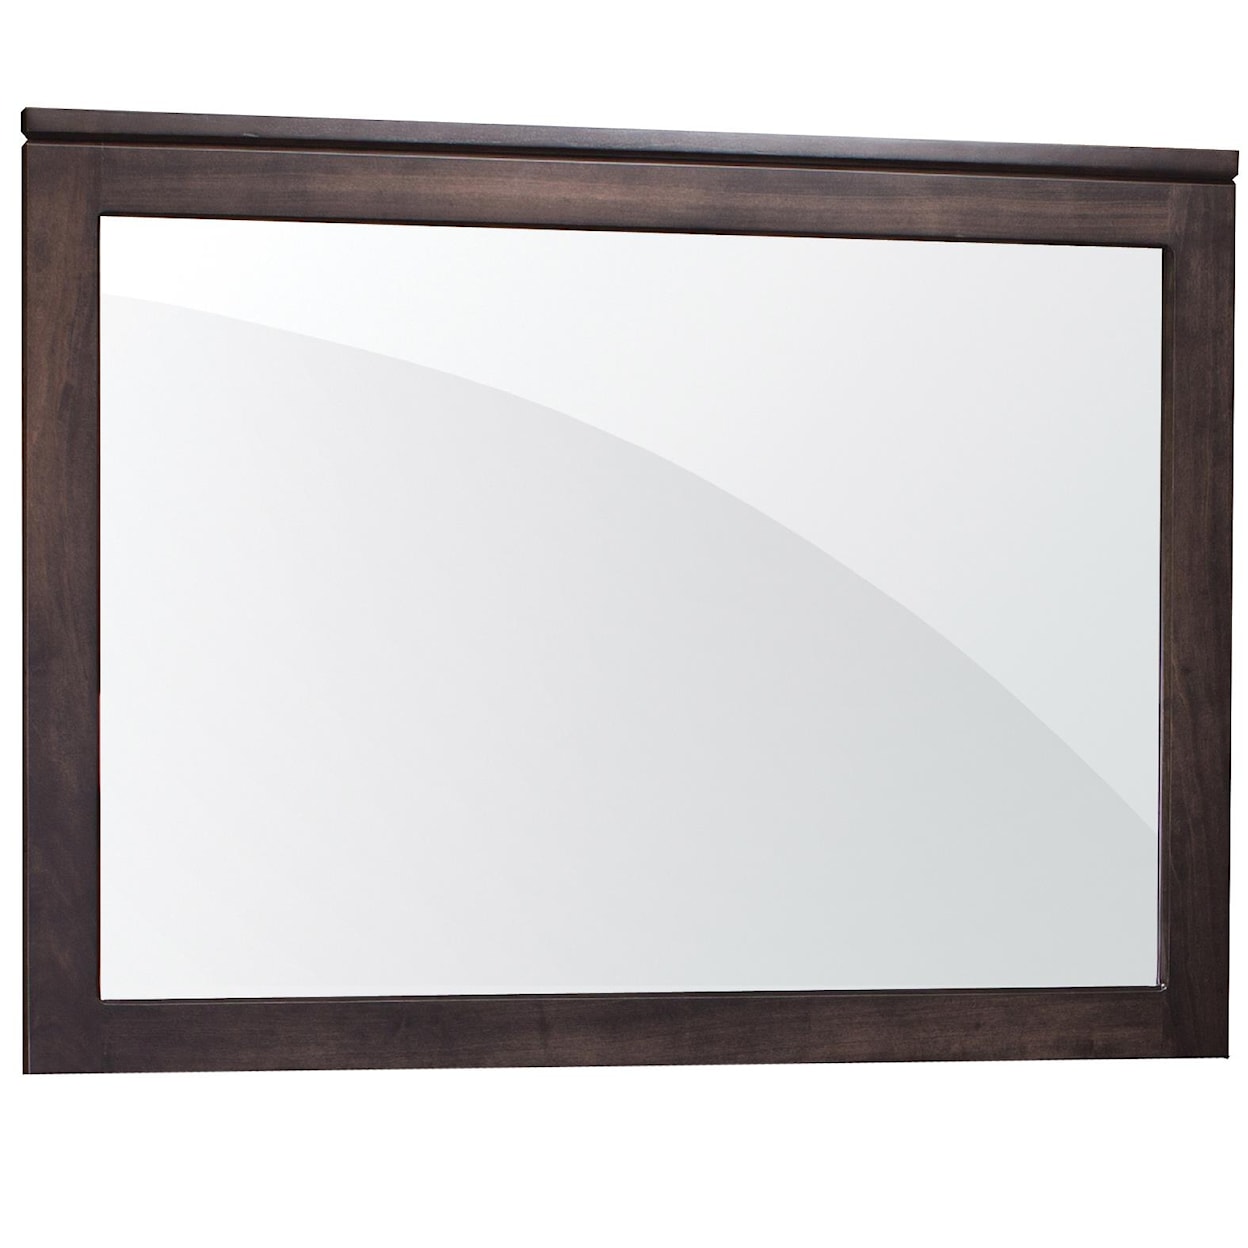 Simply Amish Justine Mule Chest Mirror